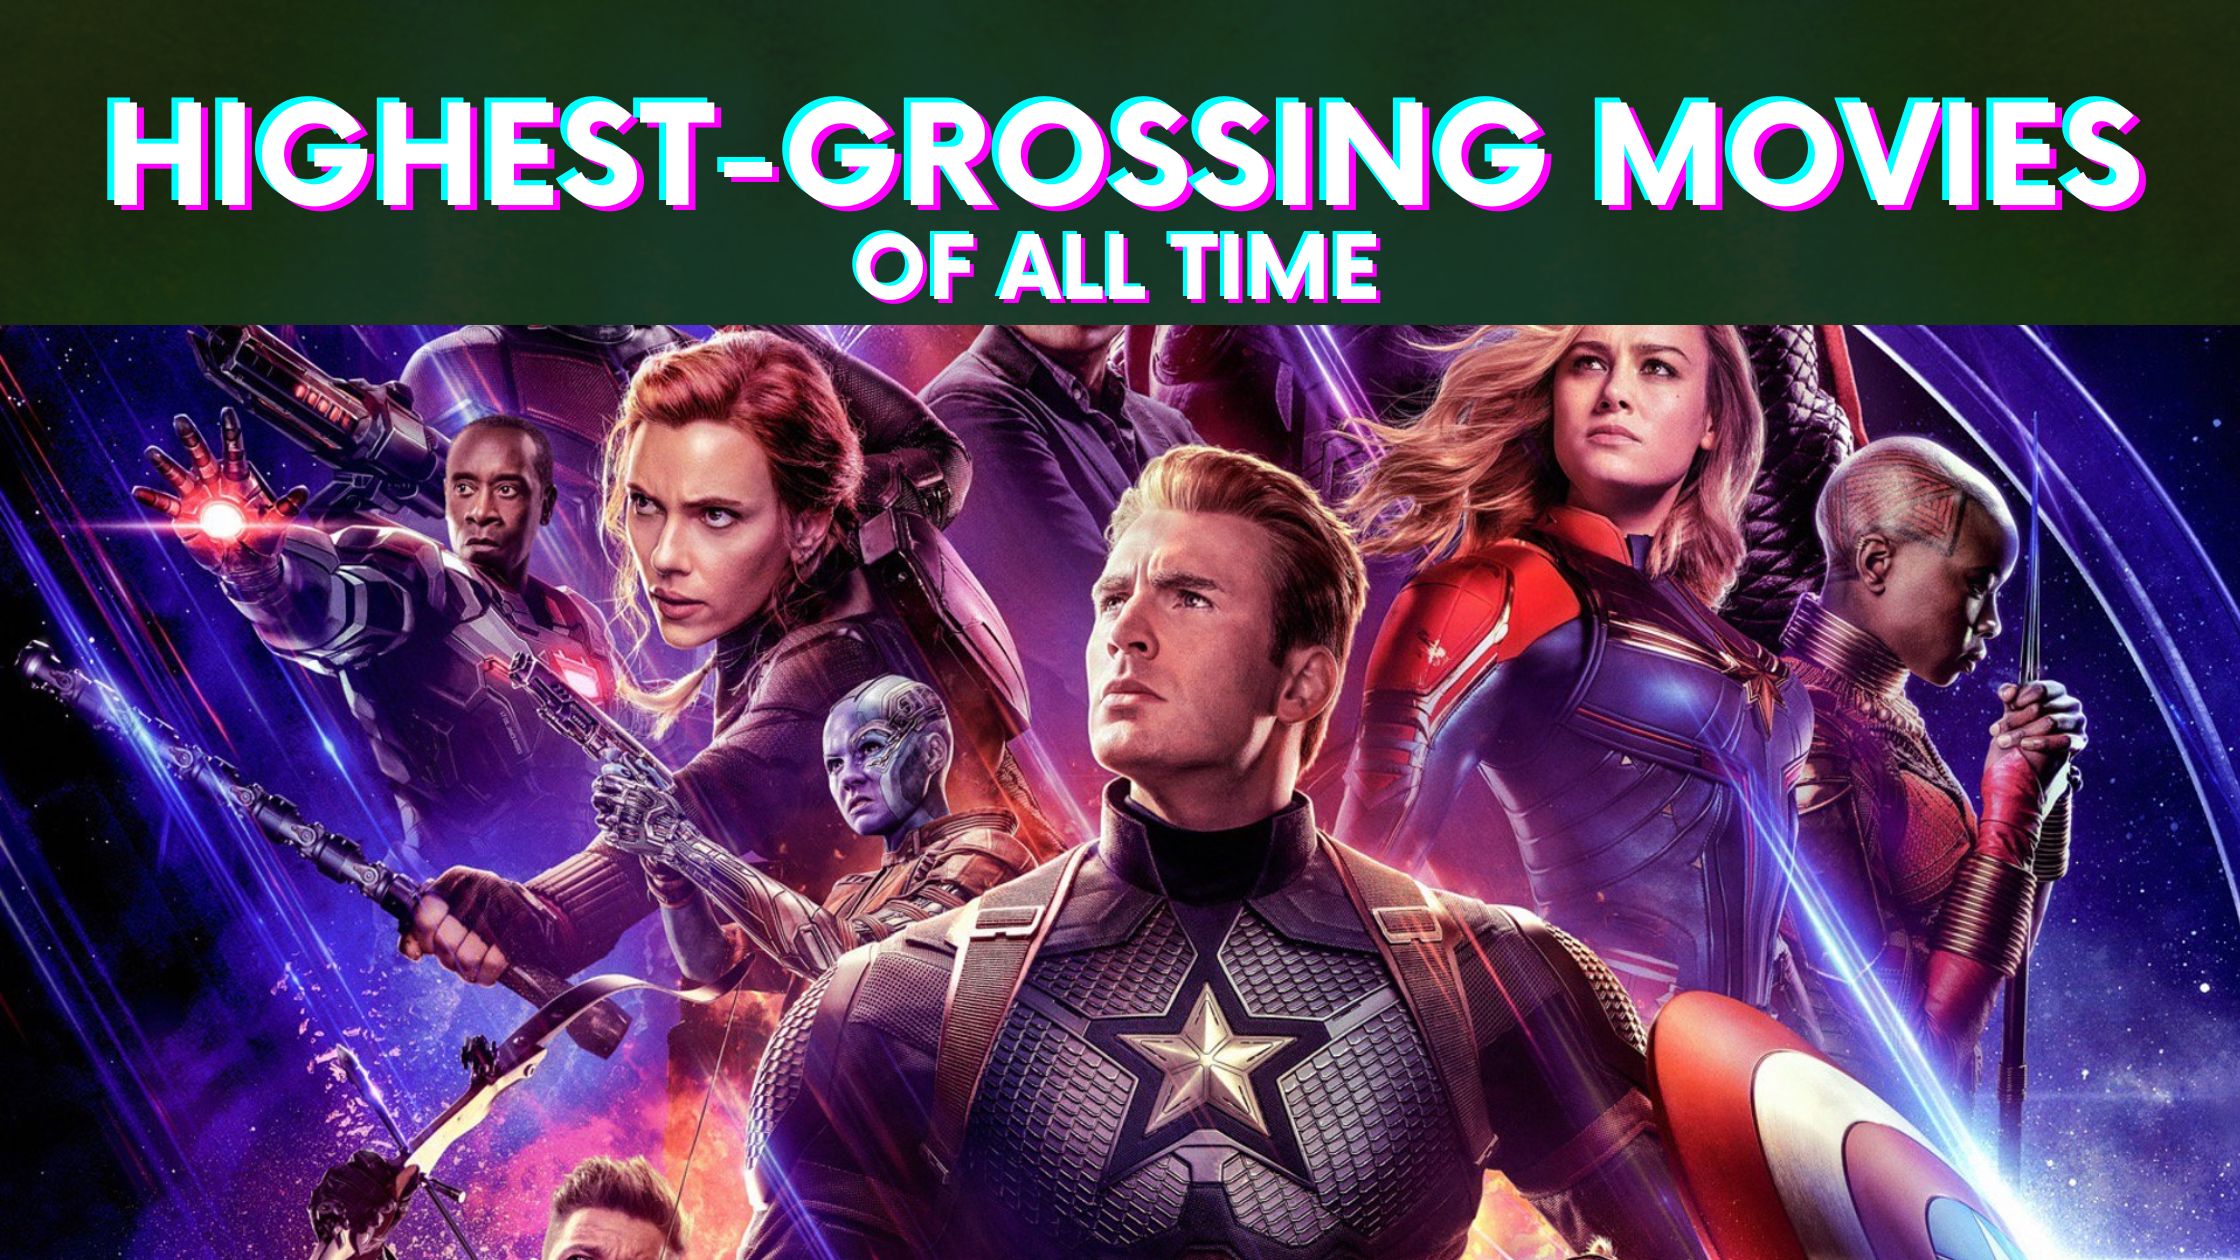 Top 10 Highest-Grossing Movies Of All Time